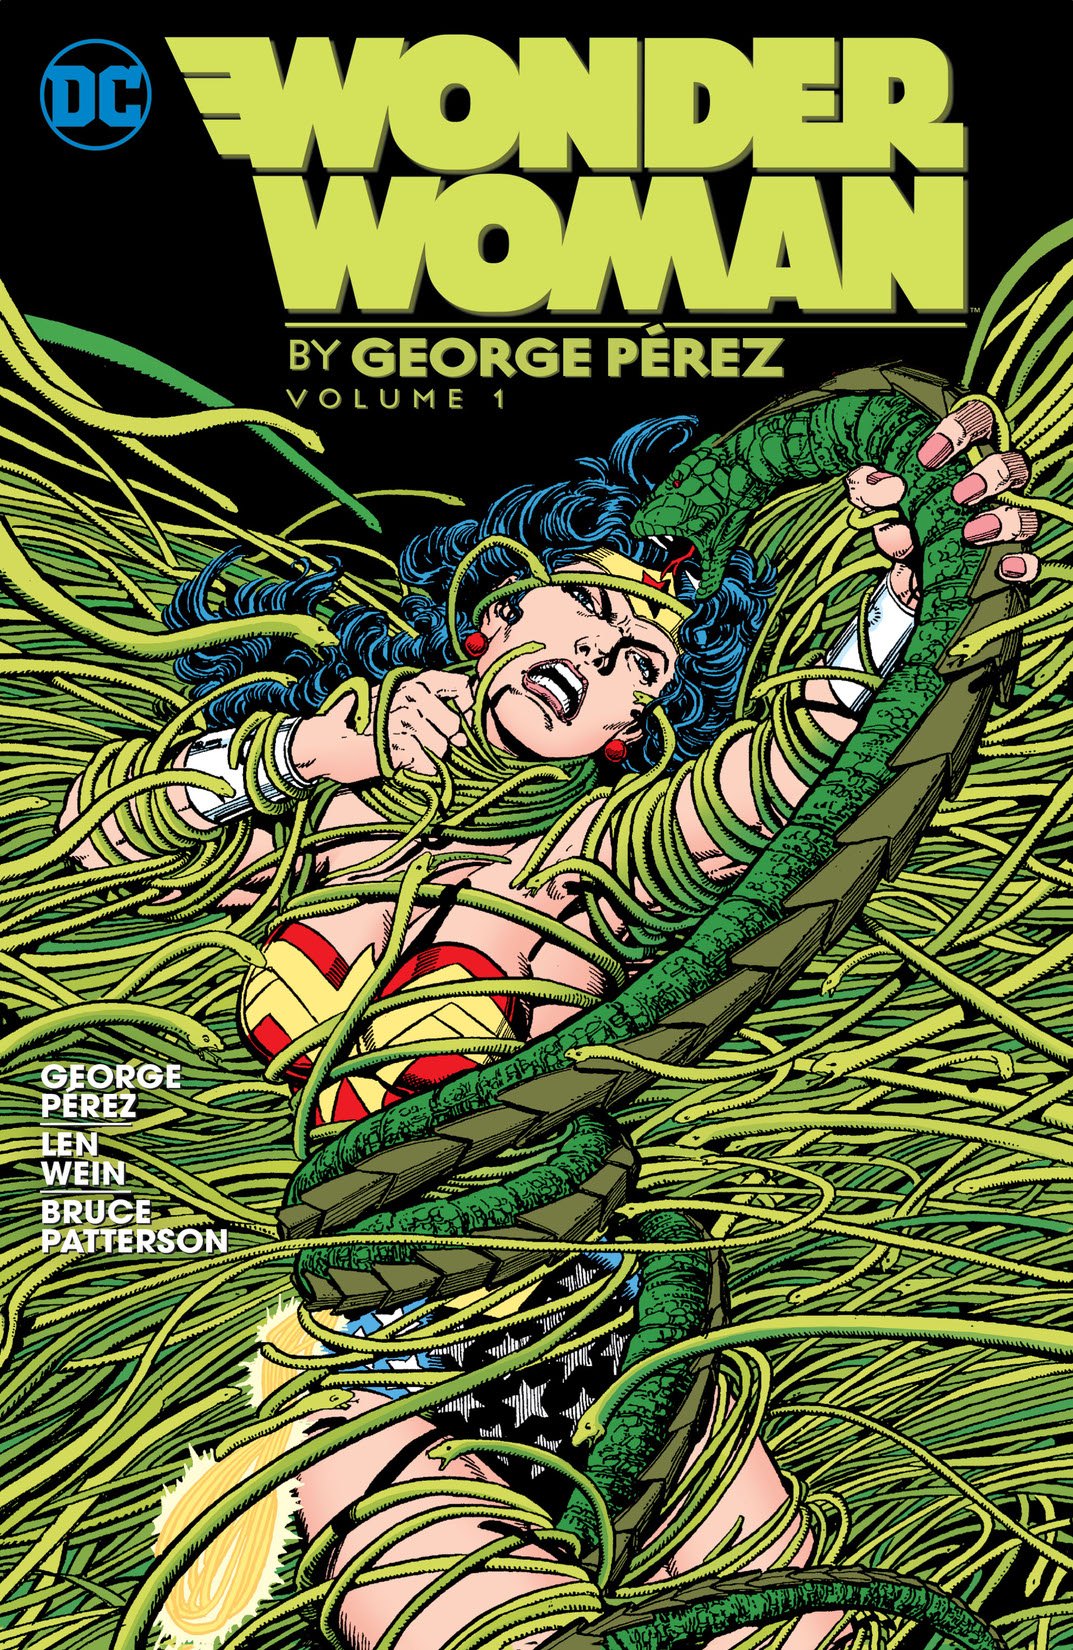 Wonder Woman By George Perez Vol. 1 preview images